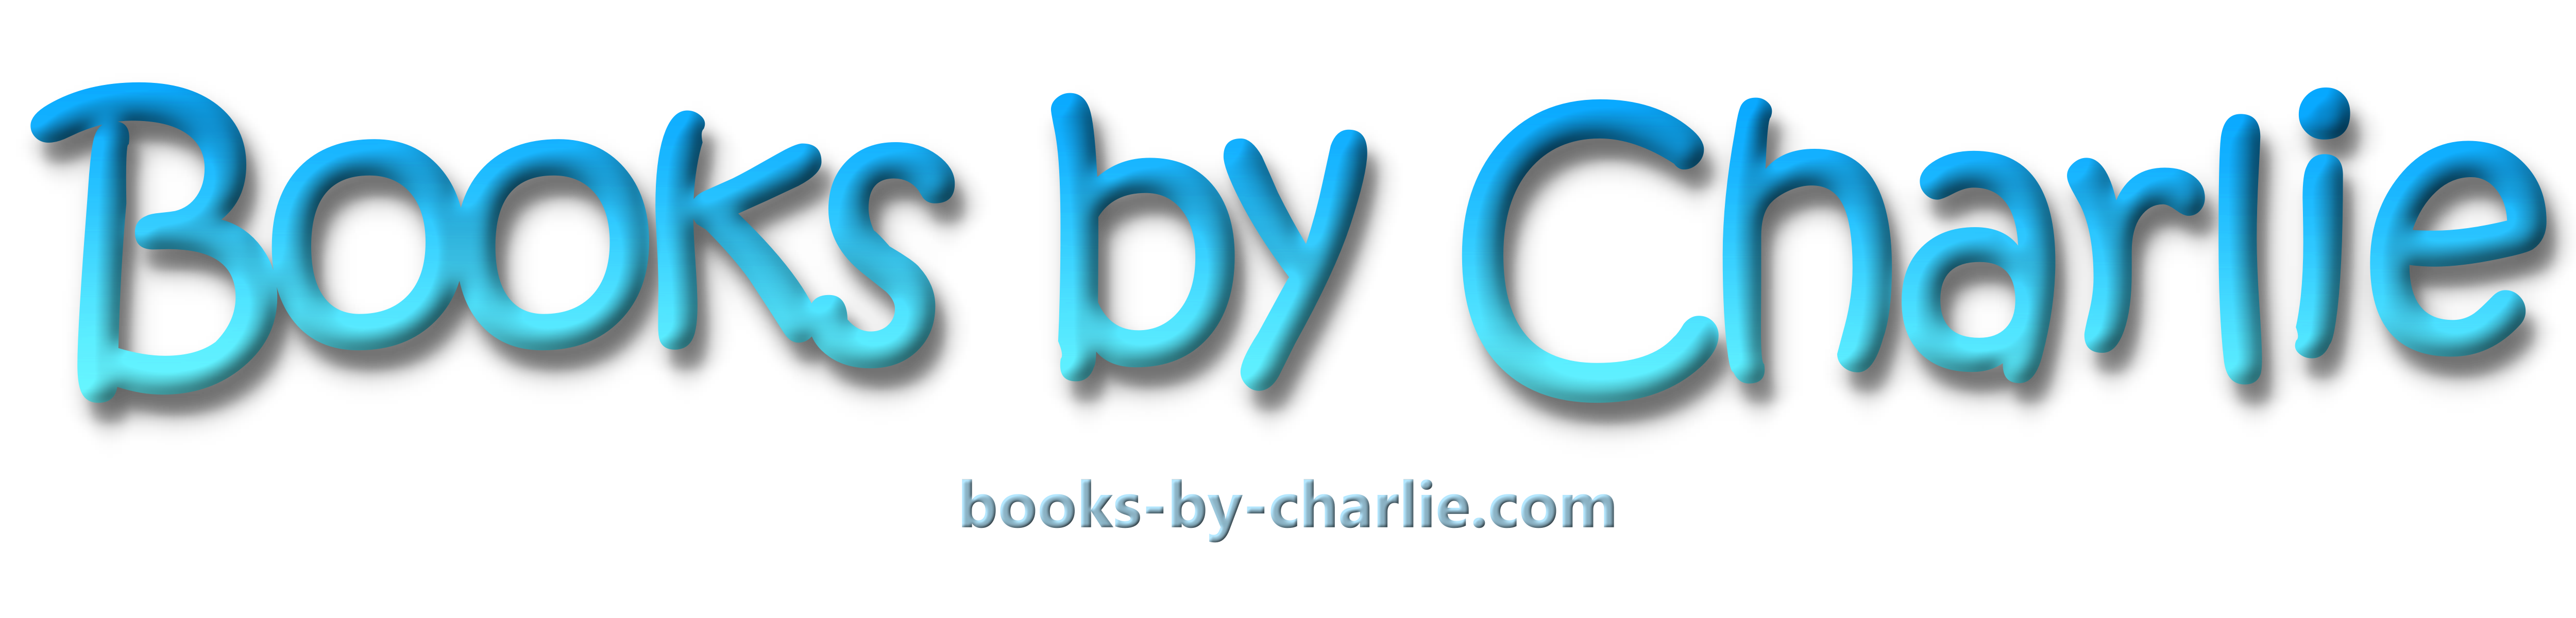 Books by Charlie